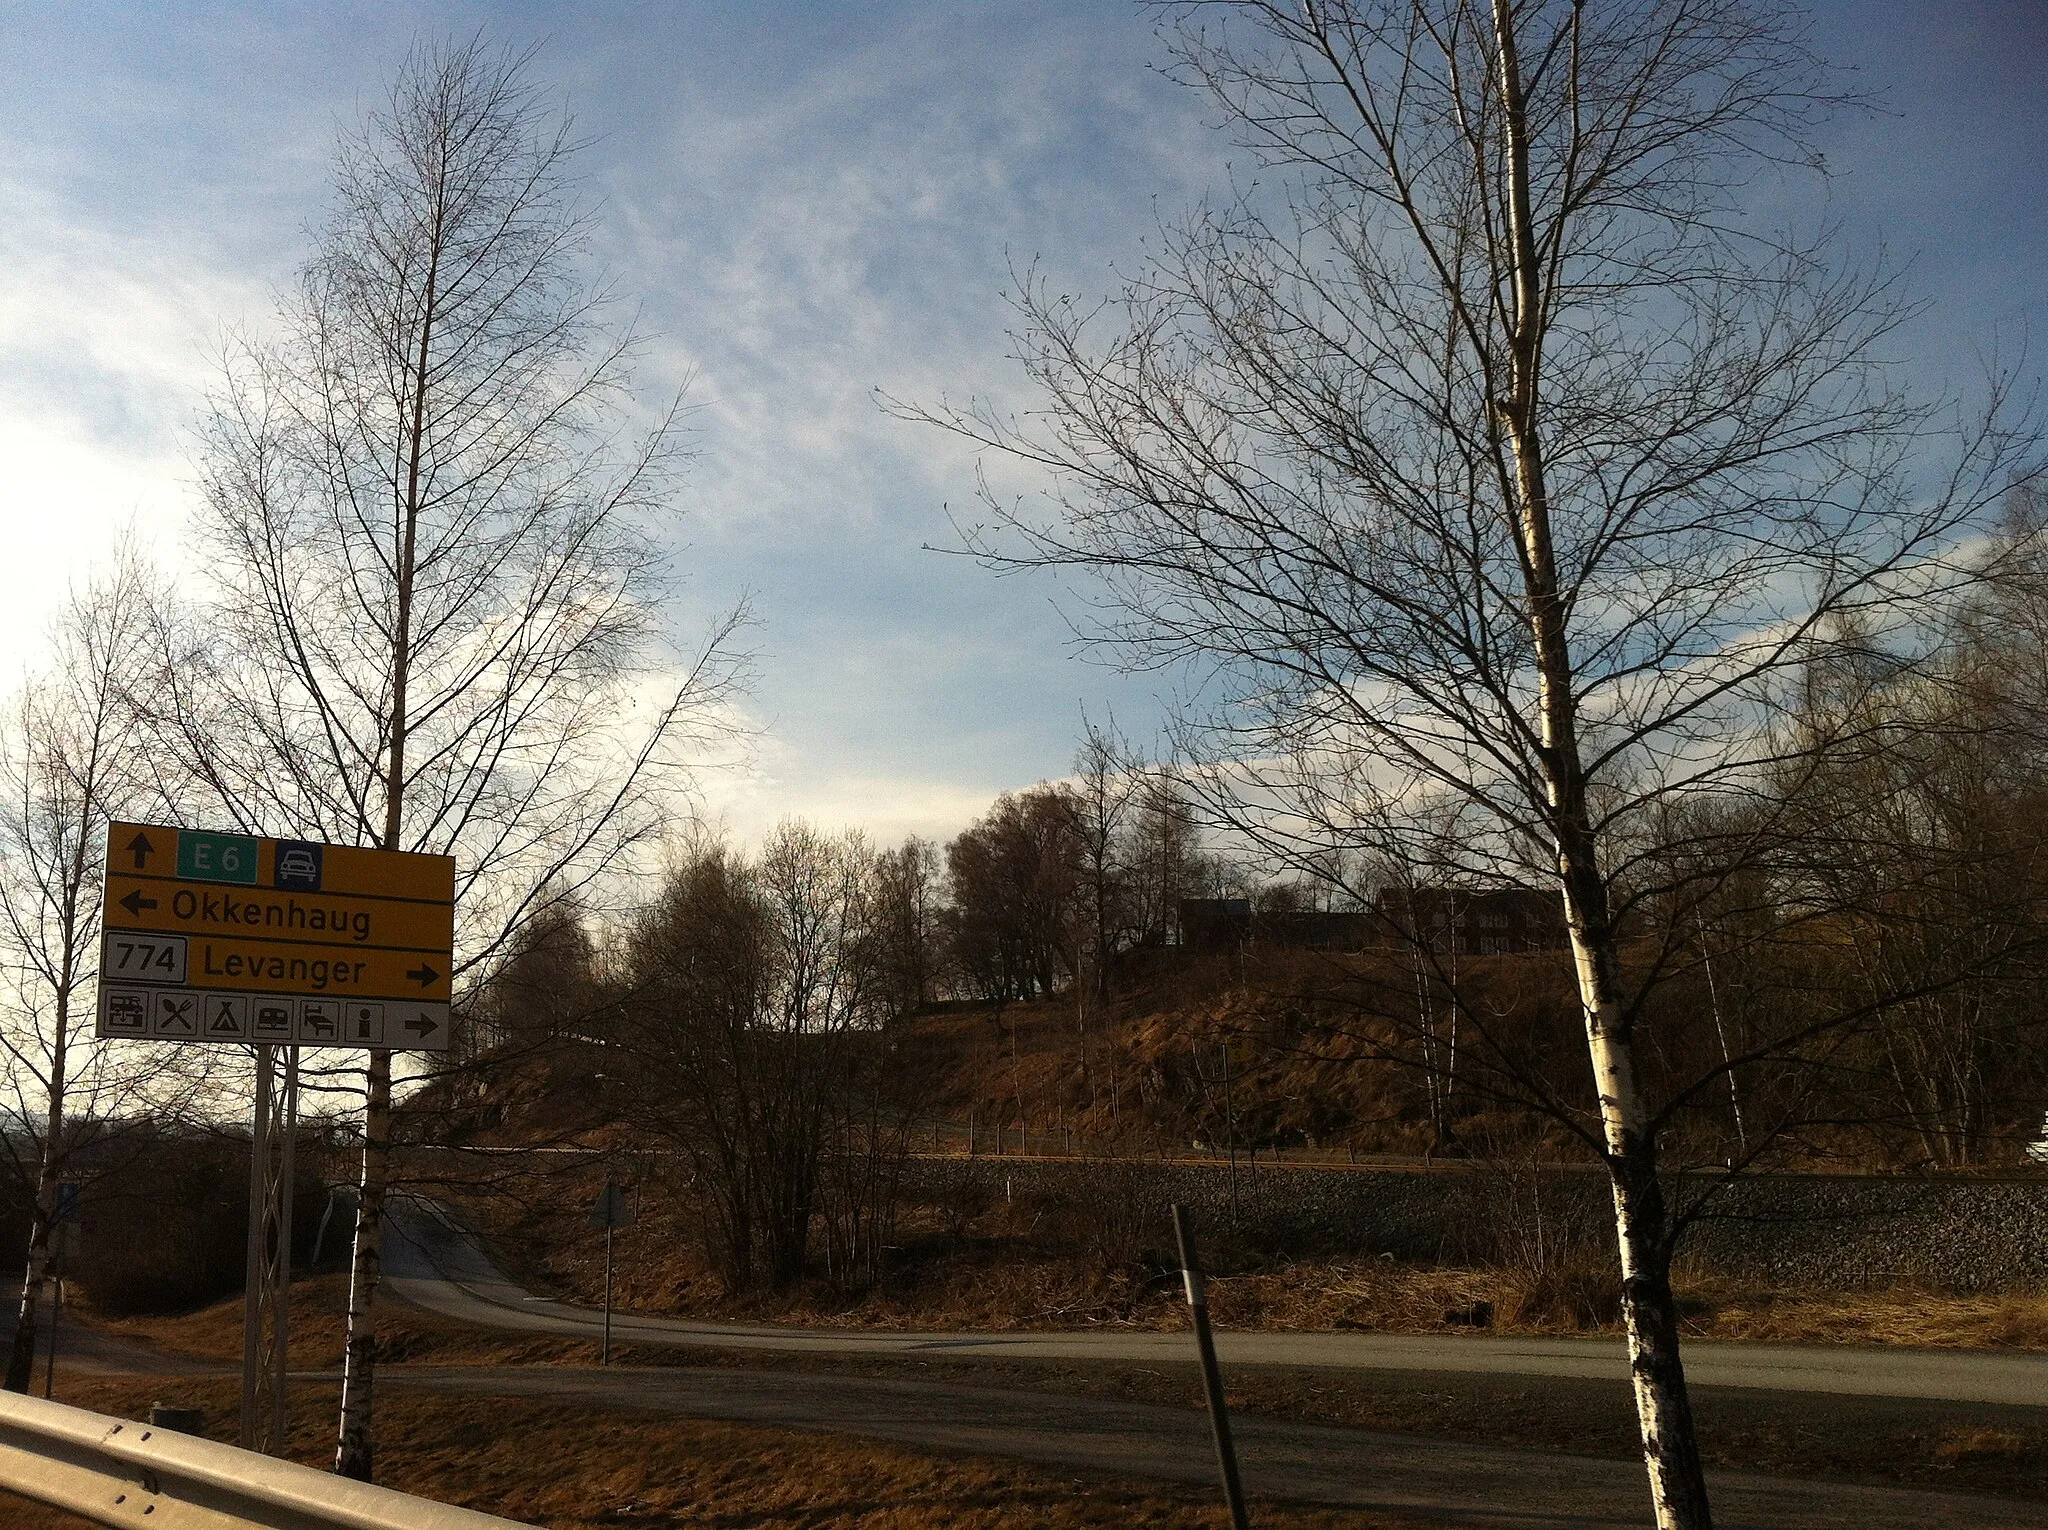 Photo showing: Okkenhaug and Levanger Sign Norway Feb 2014